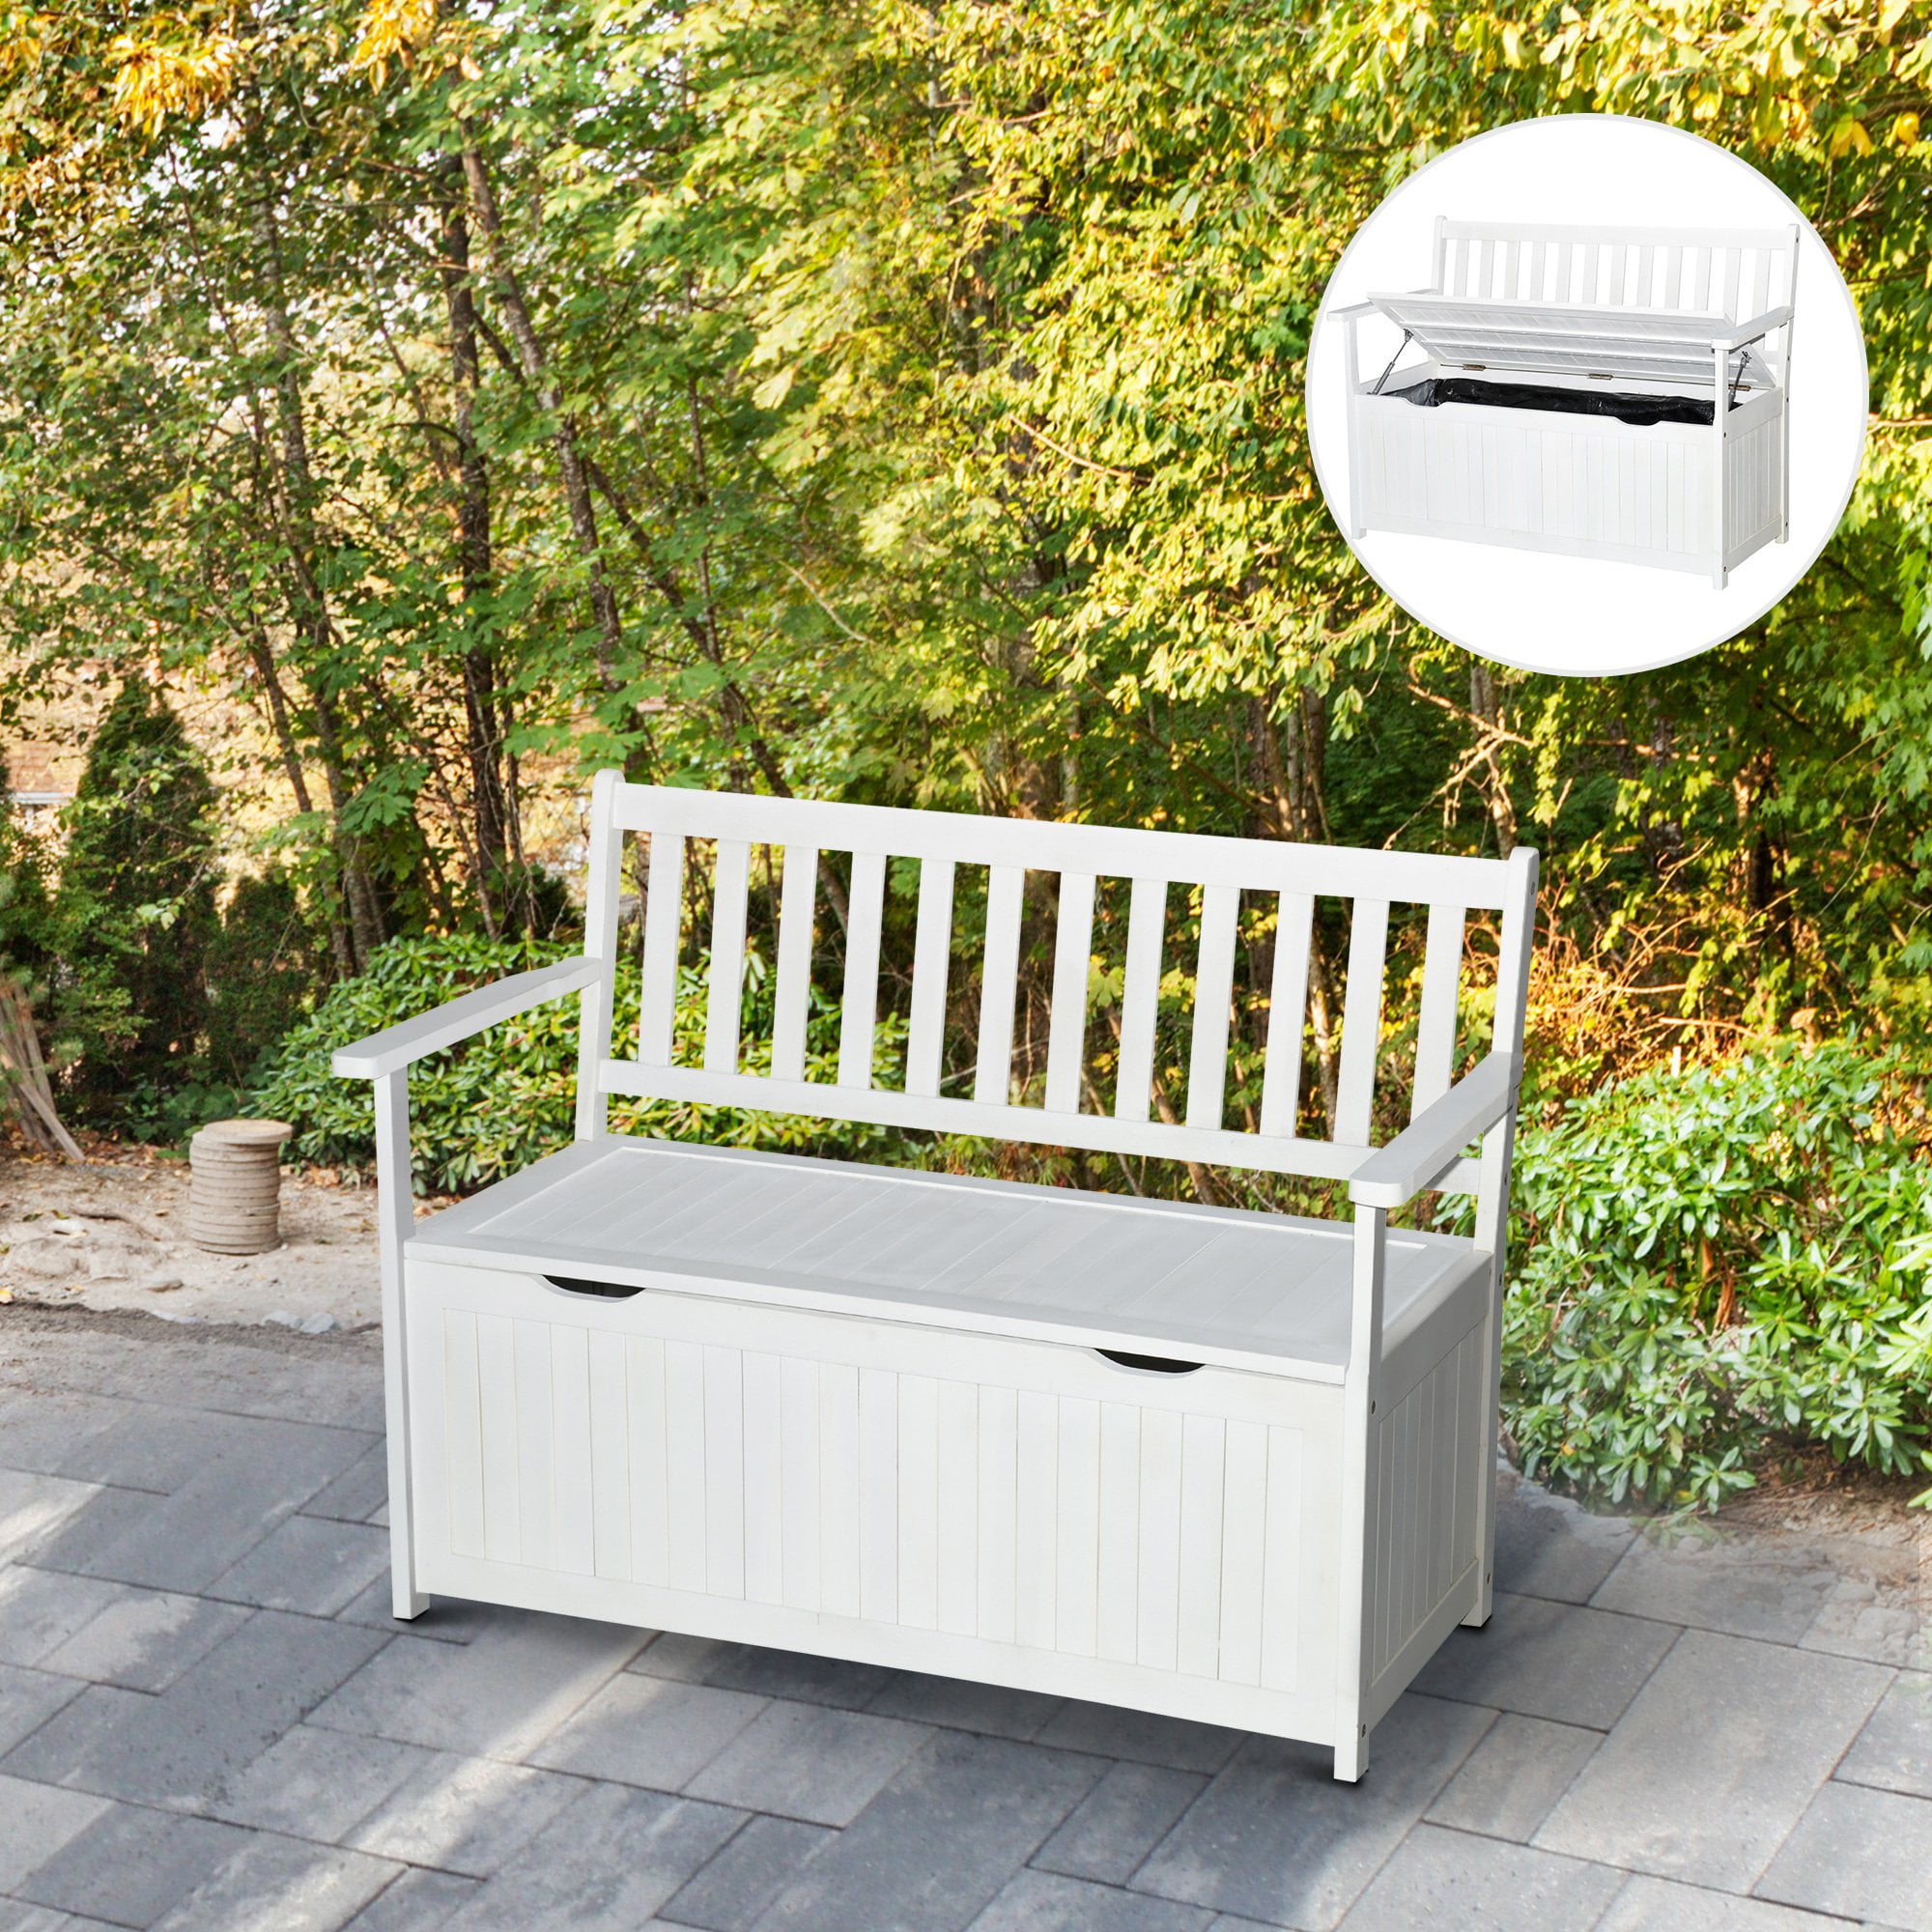 Pe Lining Deck Box Storage Container, White Outdoor Patio Bench With Storage